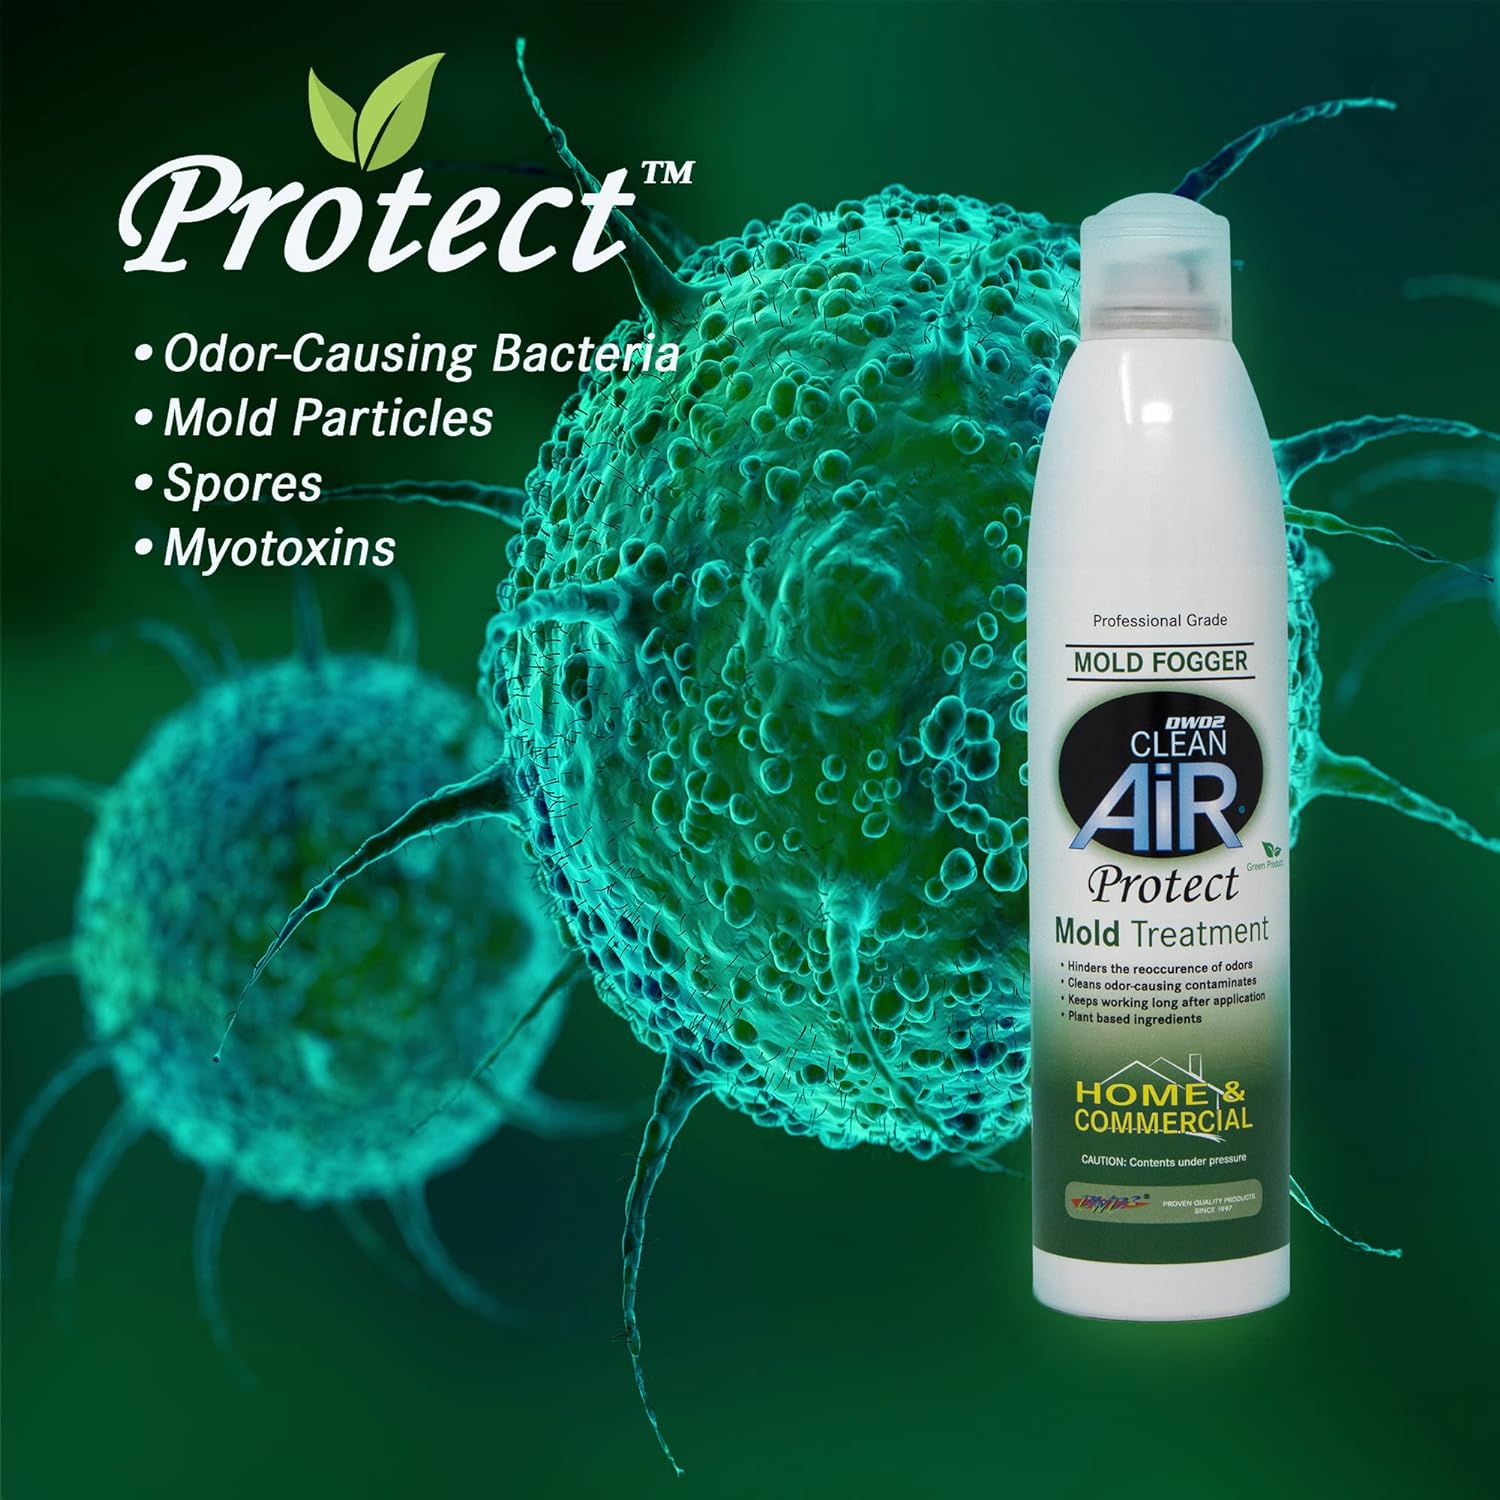 DWD2 Protect™ Home & Commercial Mold-Treatment Plant-Based Mold-Odor Remover Fogger Treatment - eco-friendly solution for a safer and healthier living and working space (8 oz.) : Industrial & Scientific